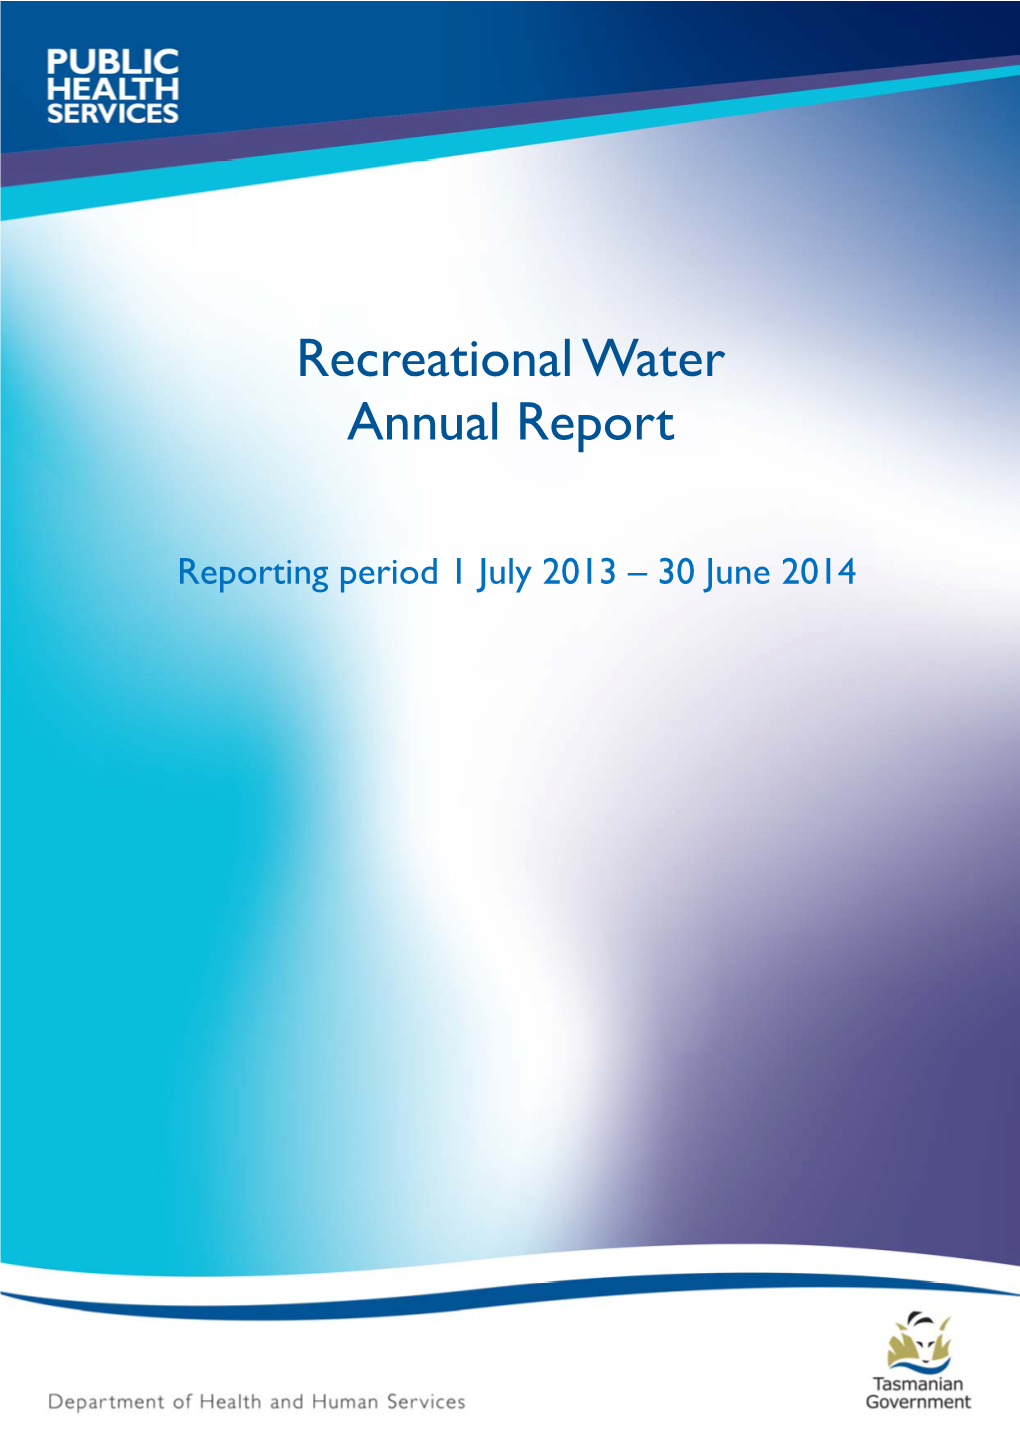 Recreational Water Annual Report